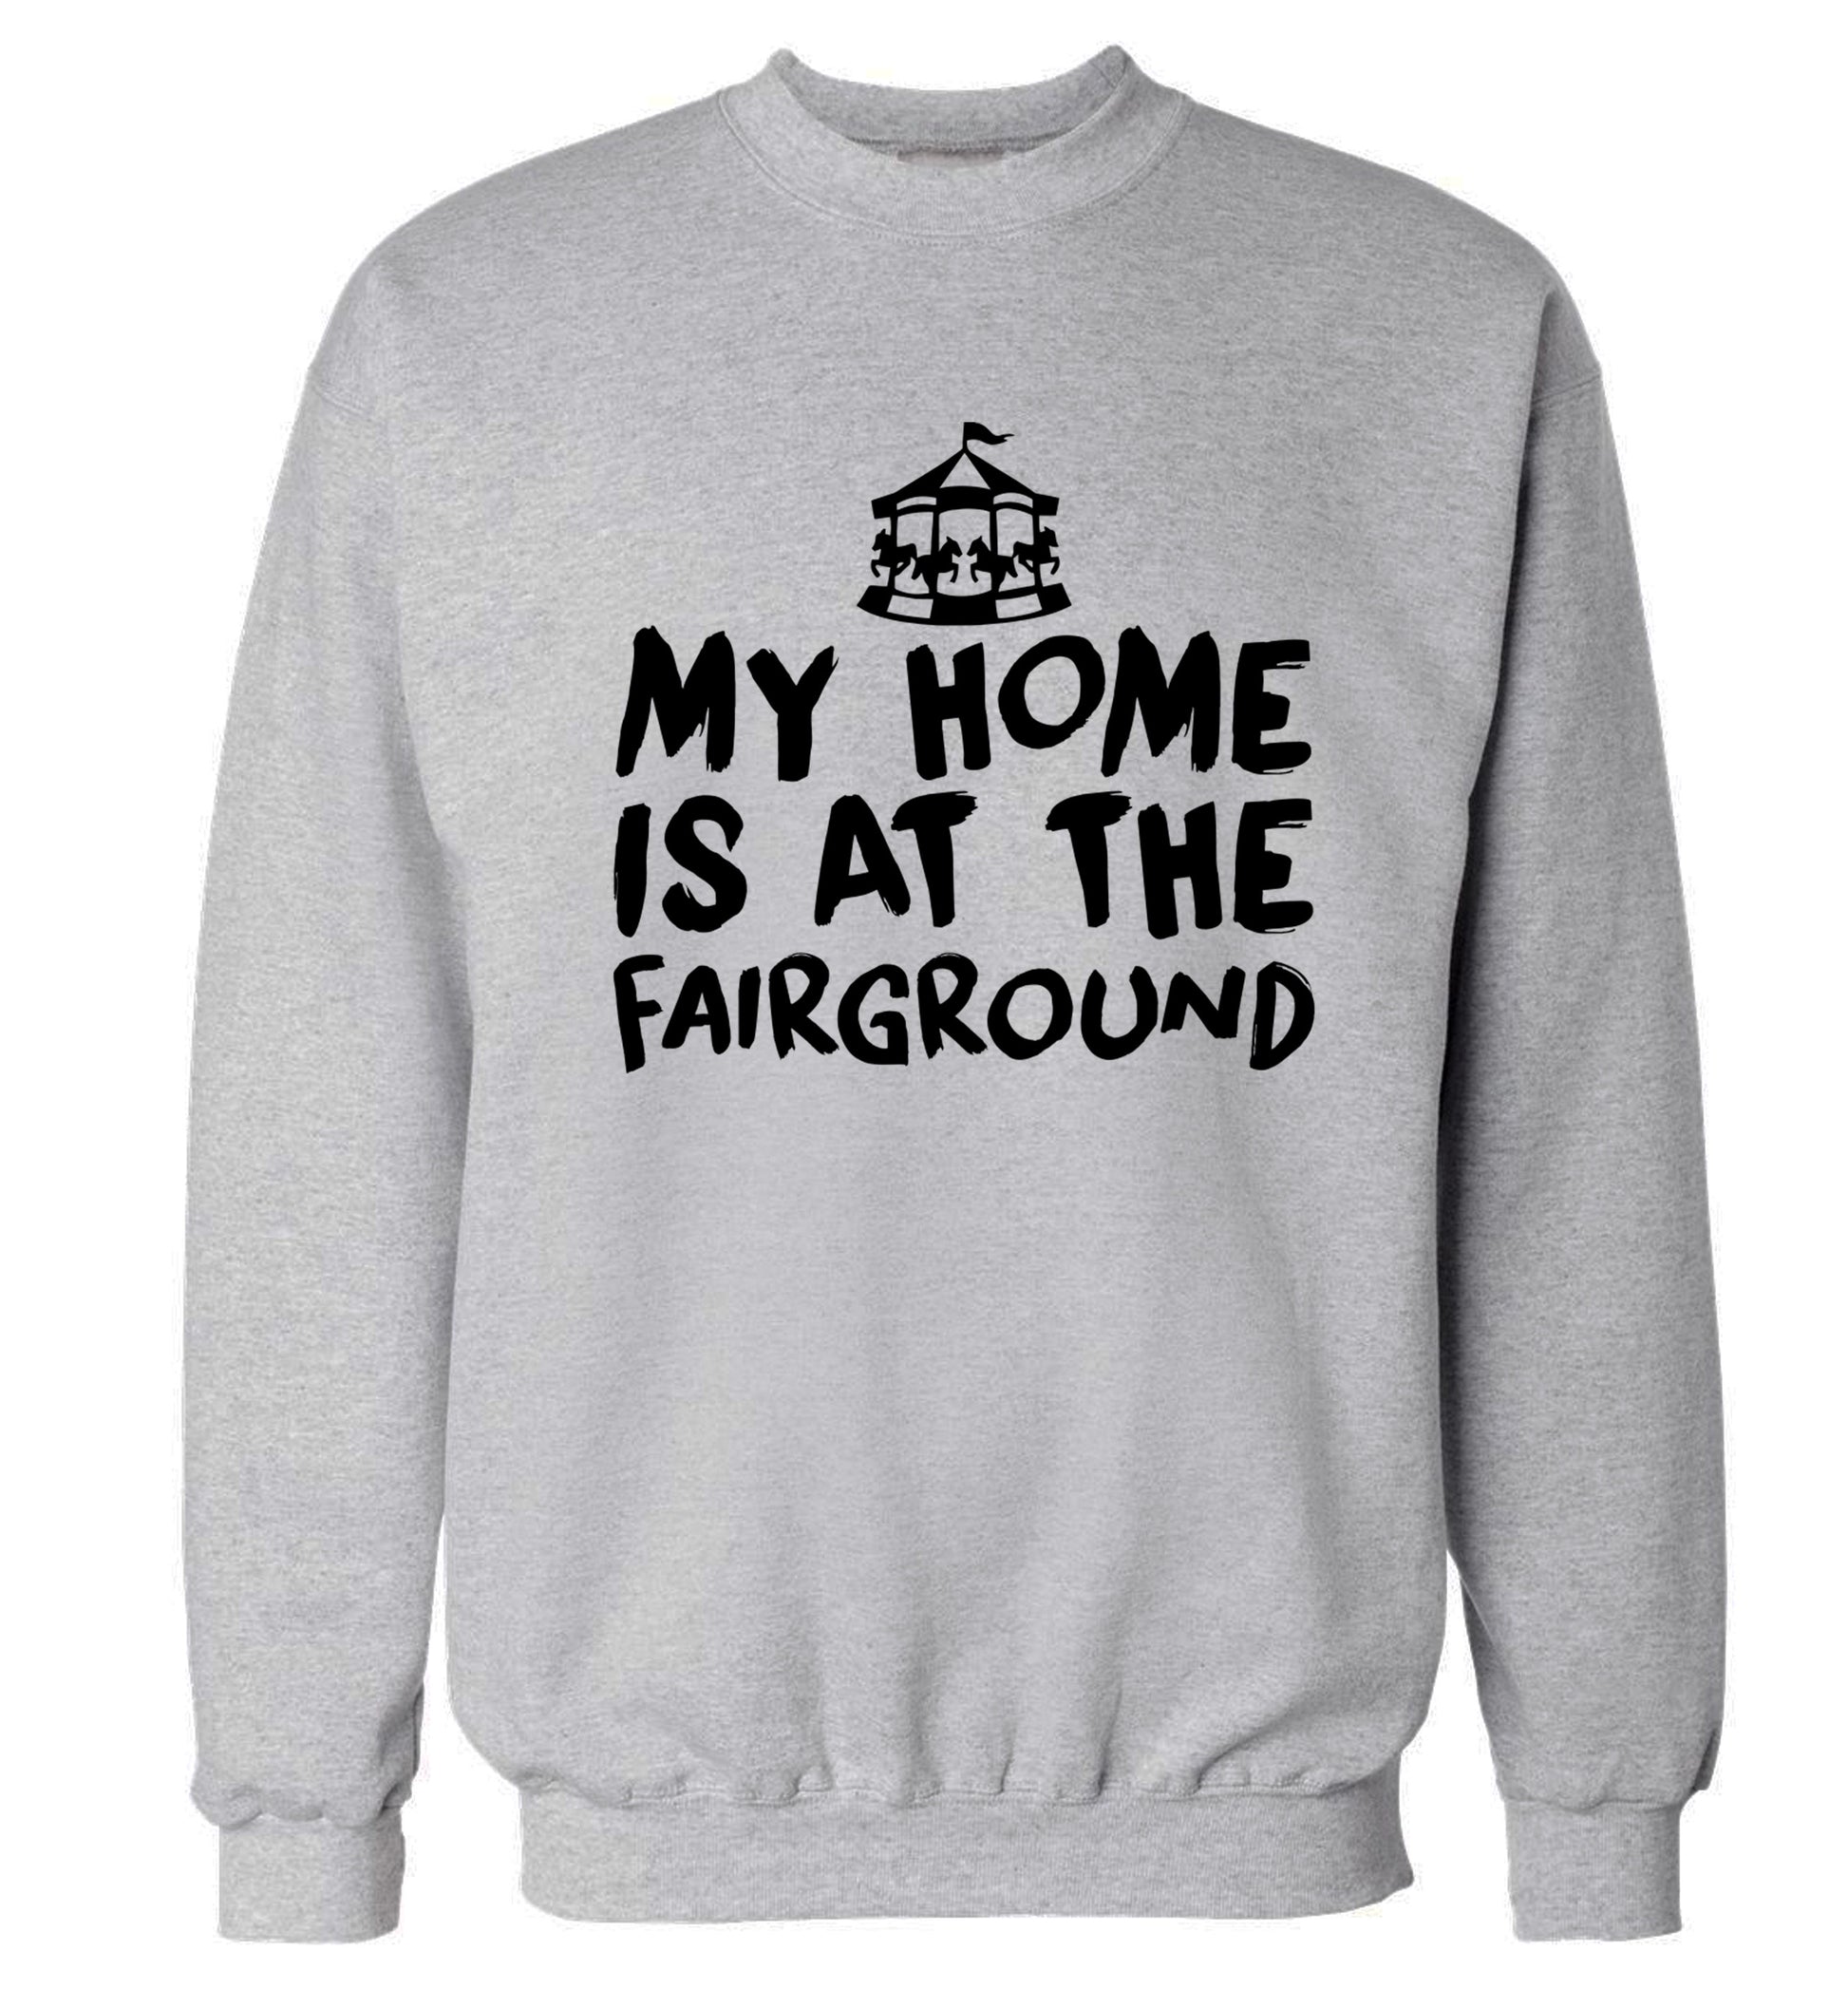 My home is at the fairground Adult's unisex grey Sweater 2XL